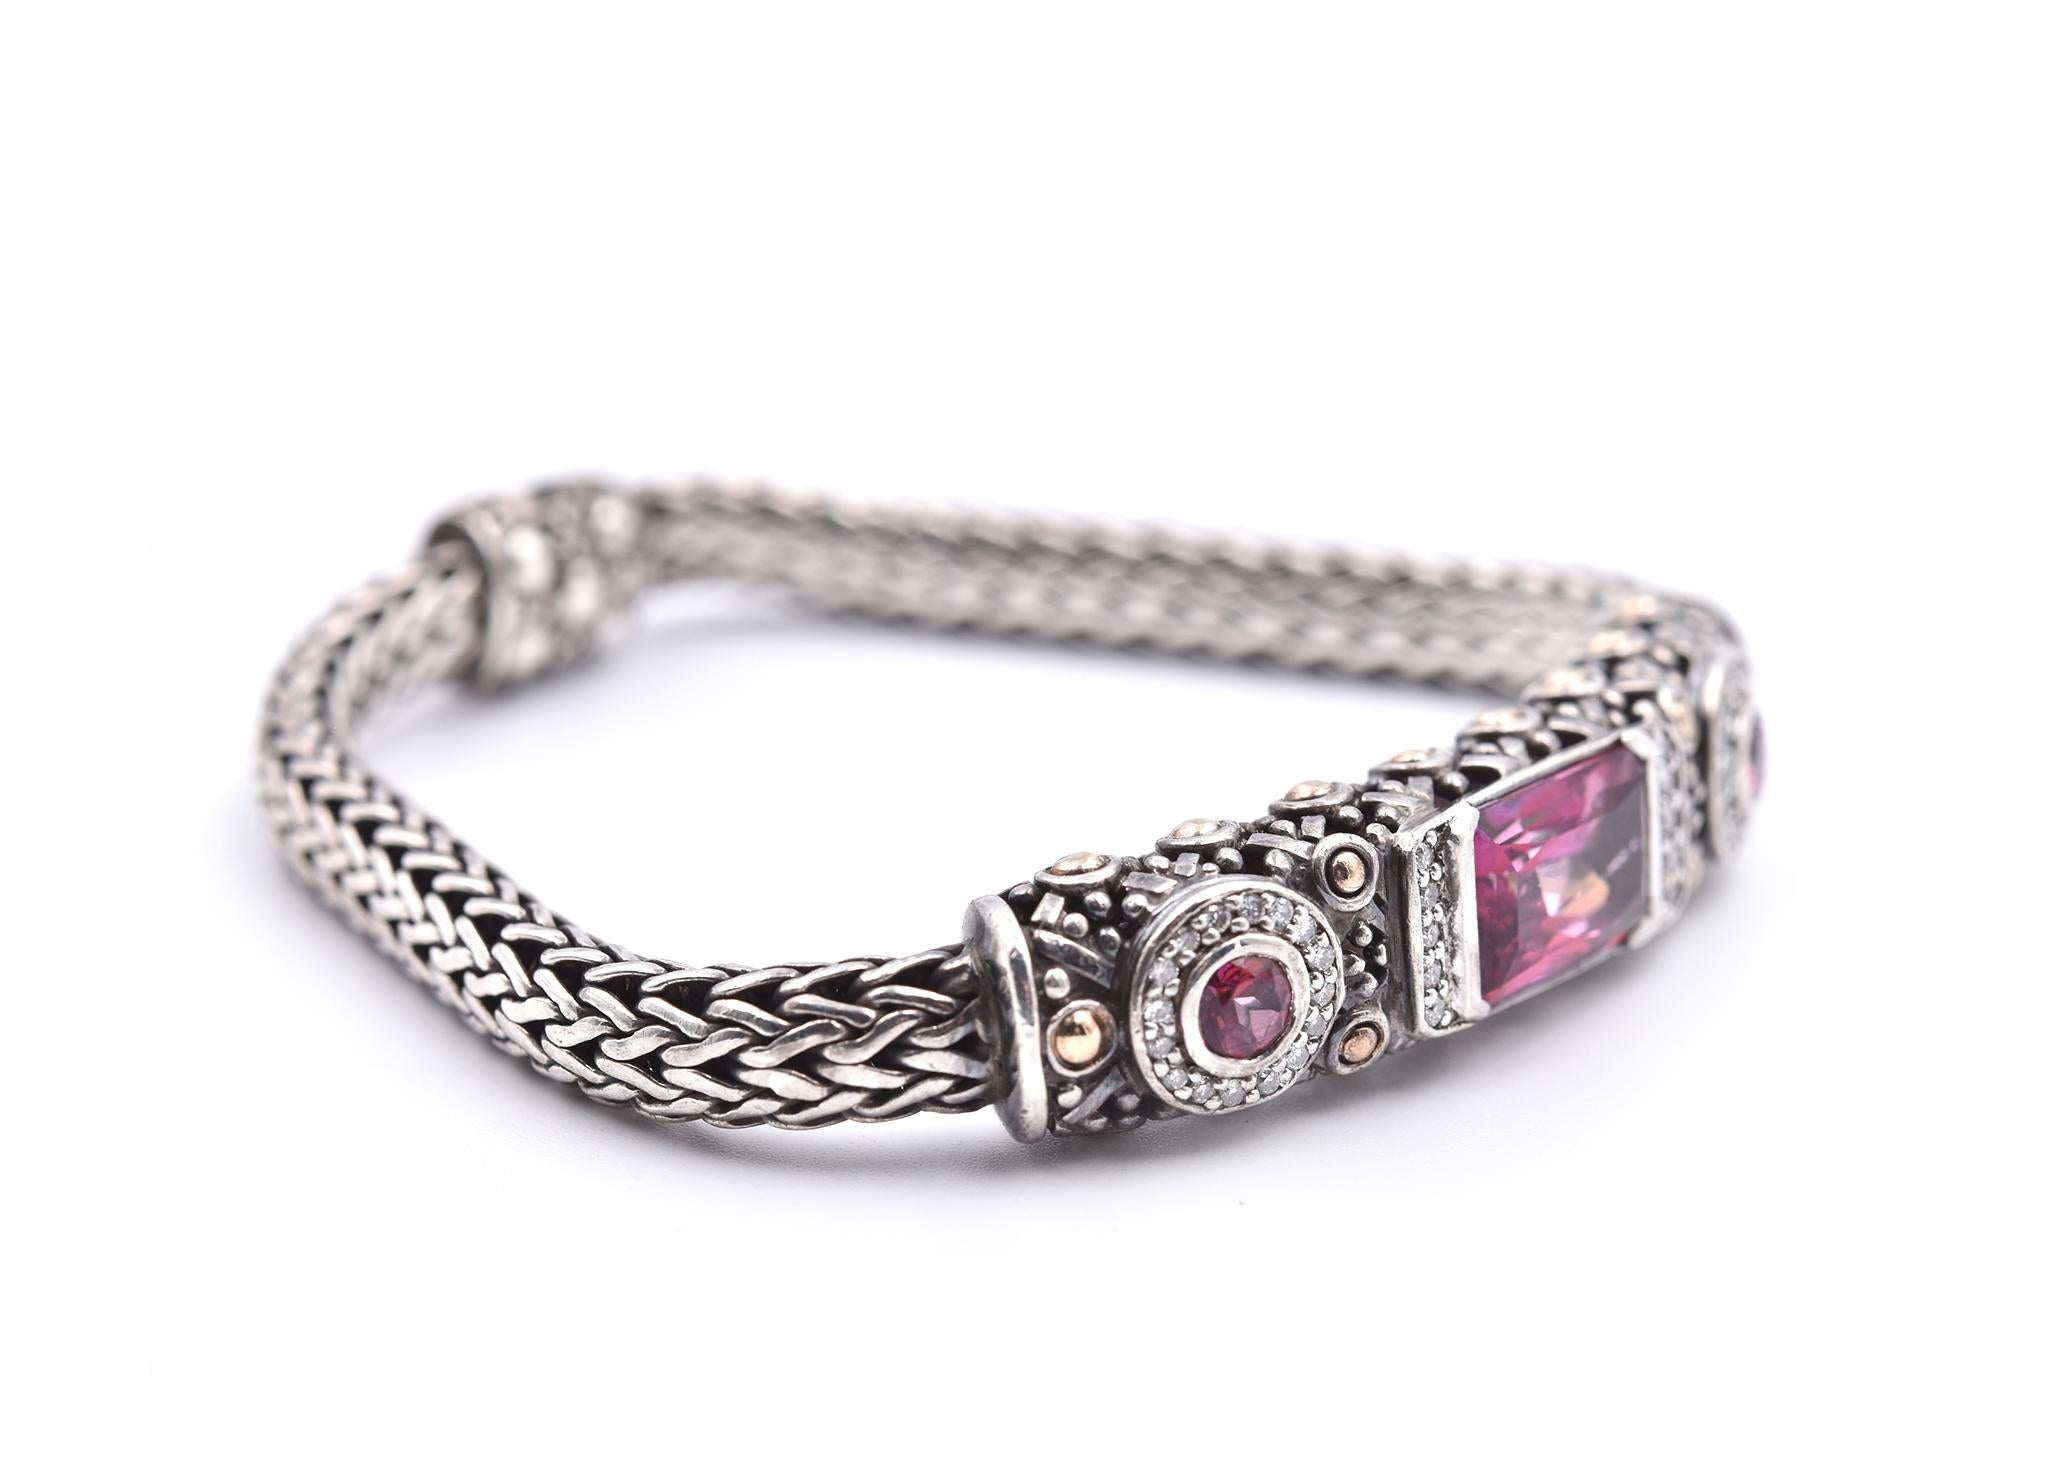 Designer: John Hardy
Material: sterling silver
Gemstone: pink tourmaline
Dimensions: bracelet will fit a 6 ½ inch wrist 
Weight: 32.70 grams
